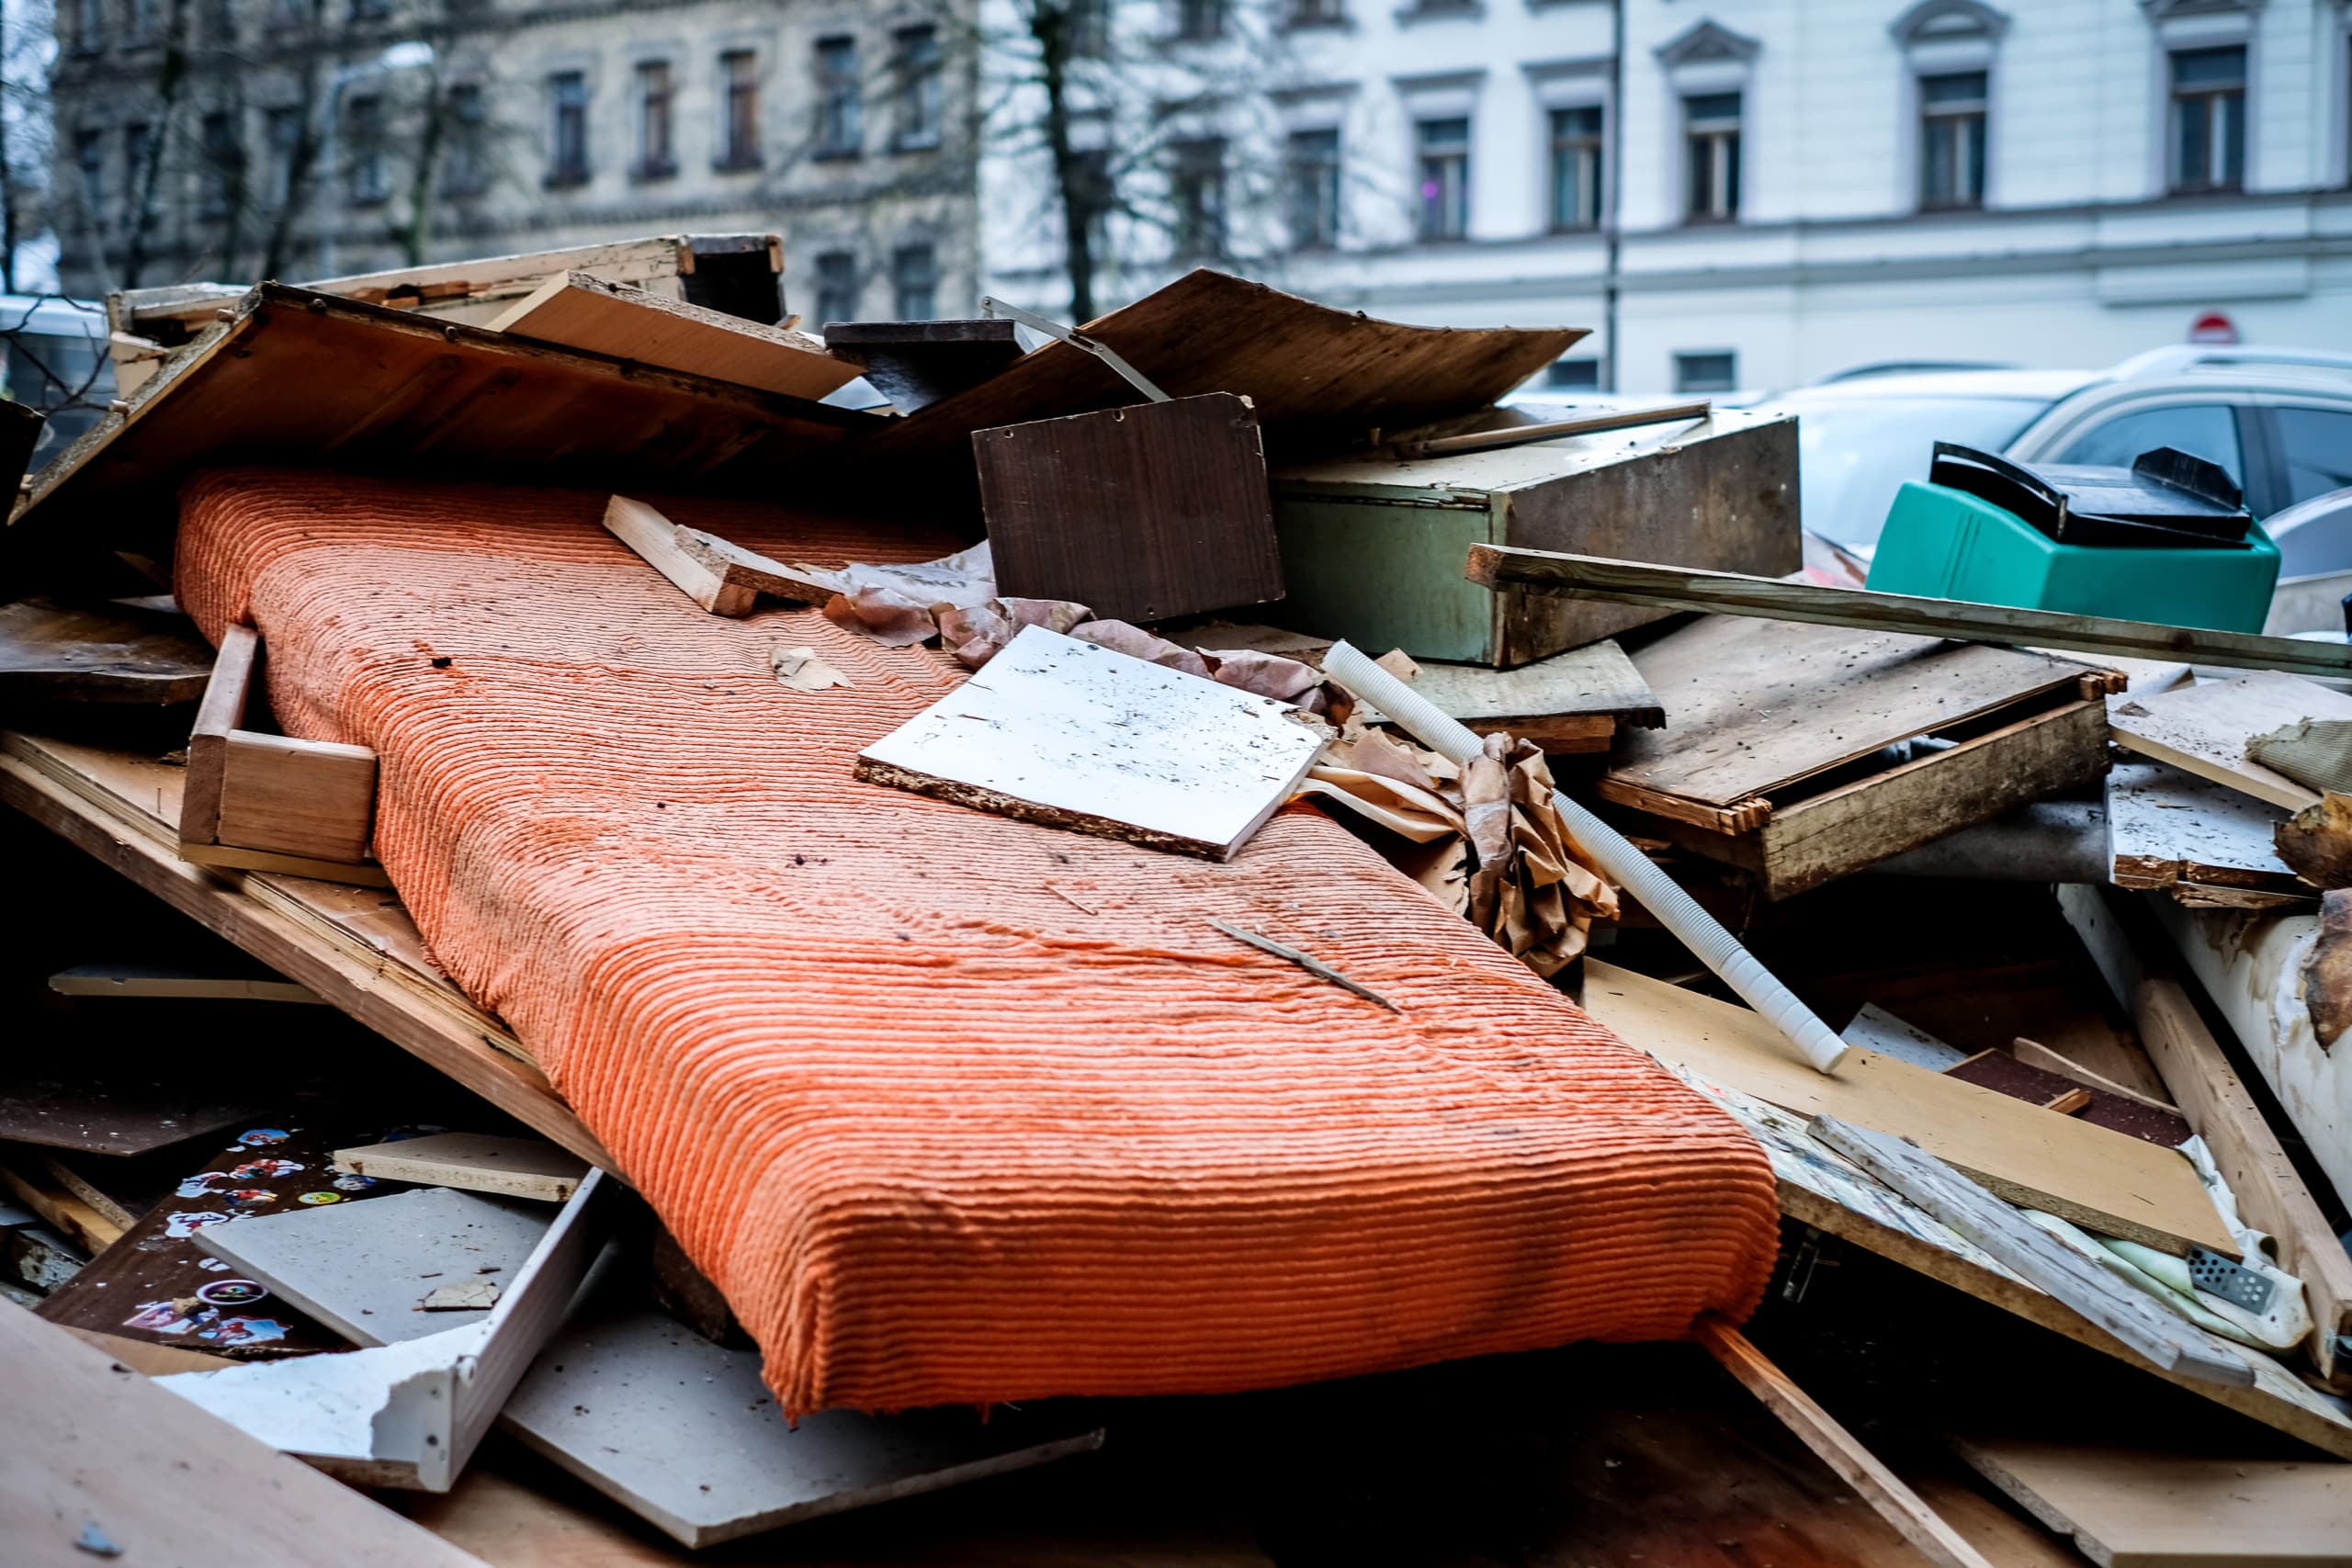 Top 5 Junk Removal Tips for a Stress-Free Experience